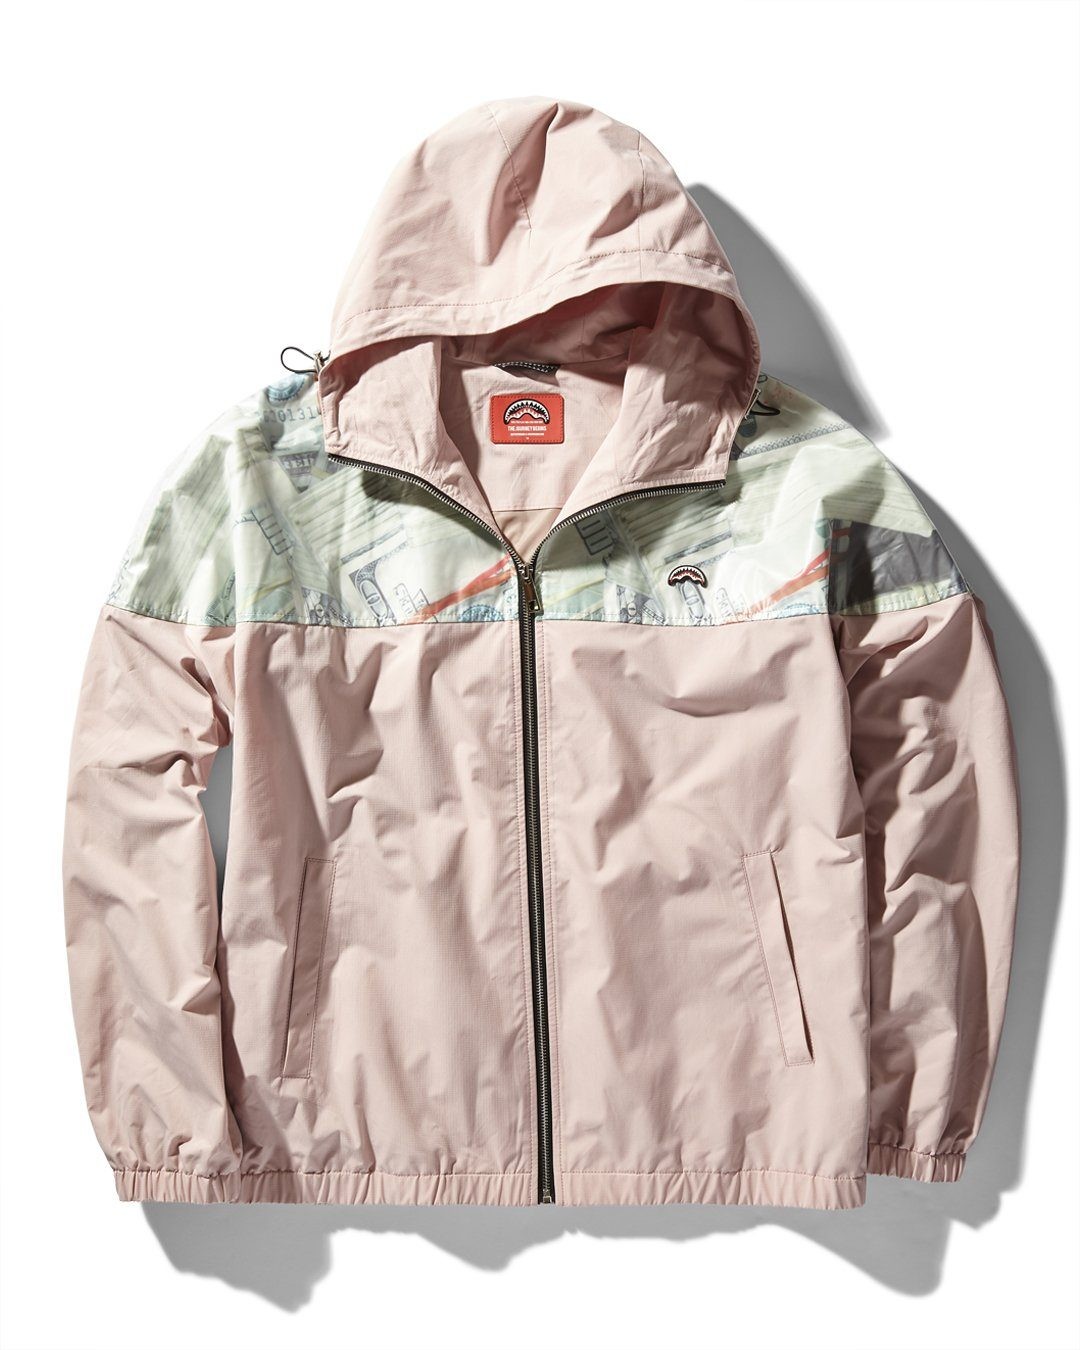 MONEY STACKS WINDBREAKER (PINK) - HIGH QUALITY AND INEXPENSIVE - MONEY STACKS WINDBREAKER (PINK) HIGH QUALITY AND INEXPENSIVE-31